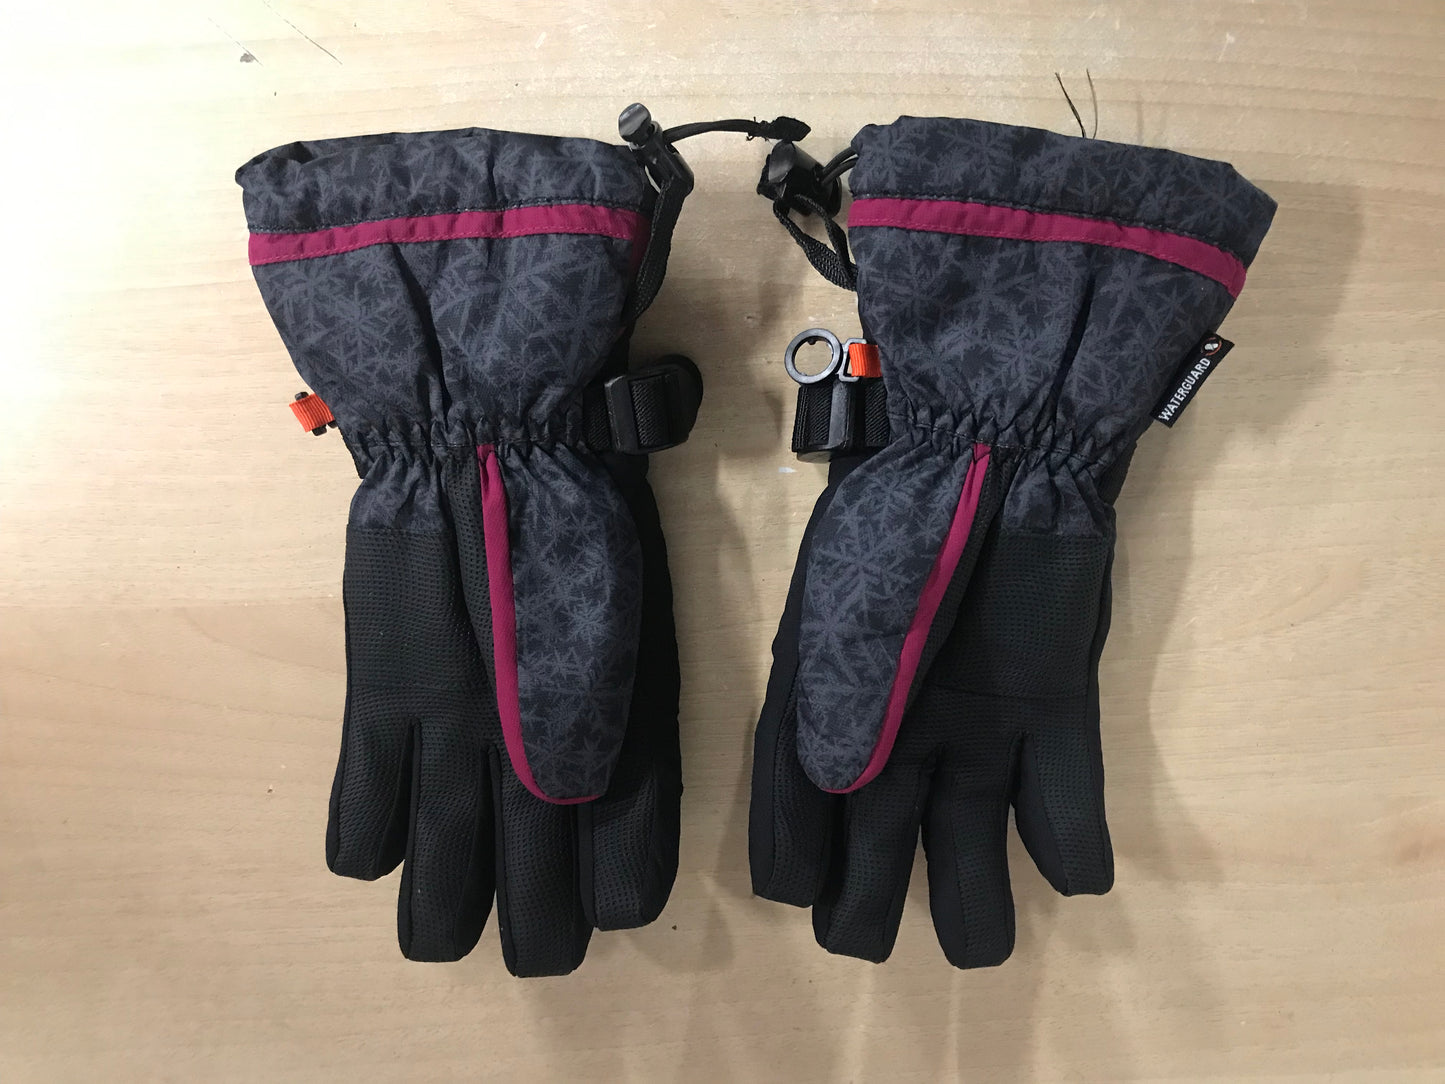 Winter Gloves and Mitts Child Size 10-12 Kombi Grey Fushia Excellent